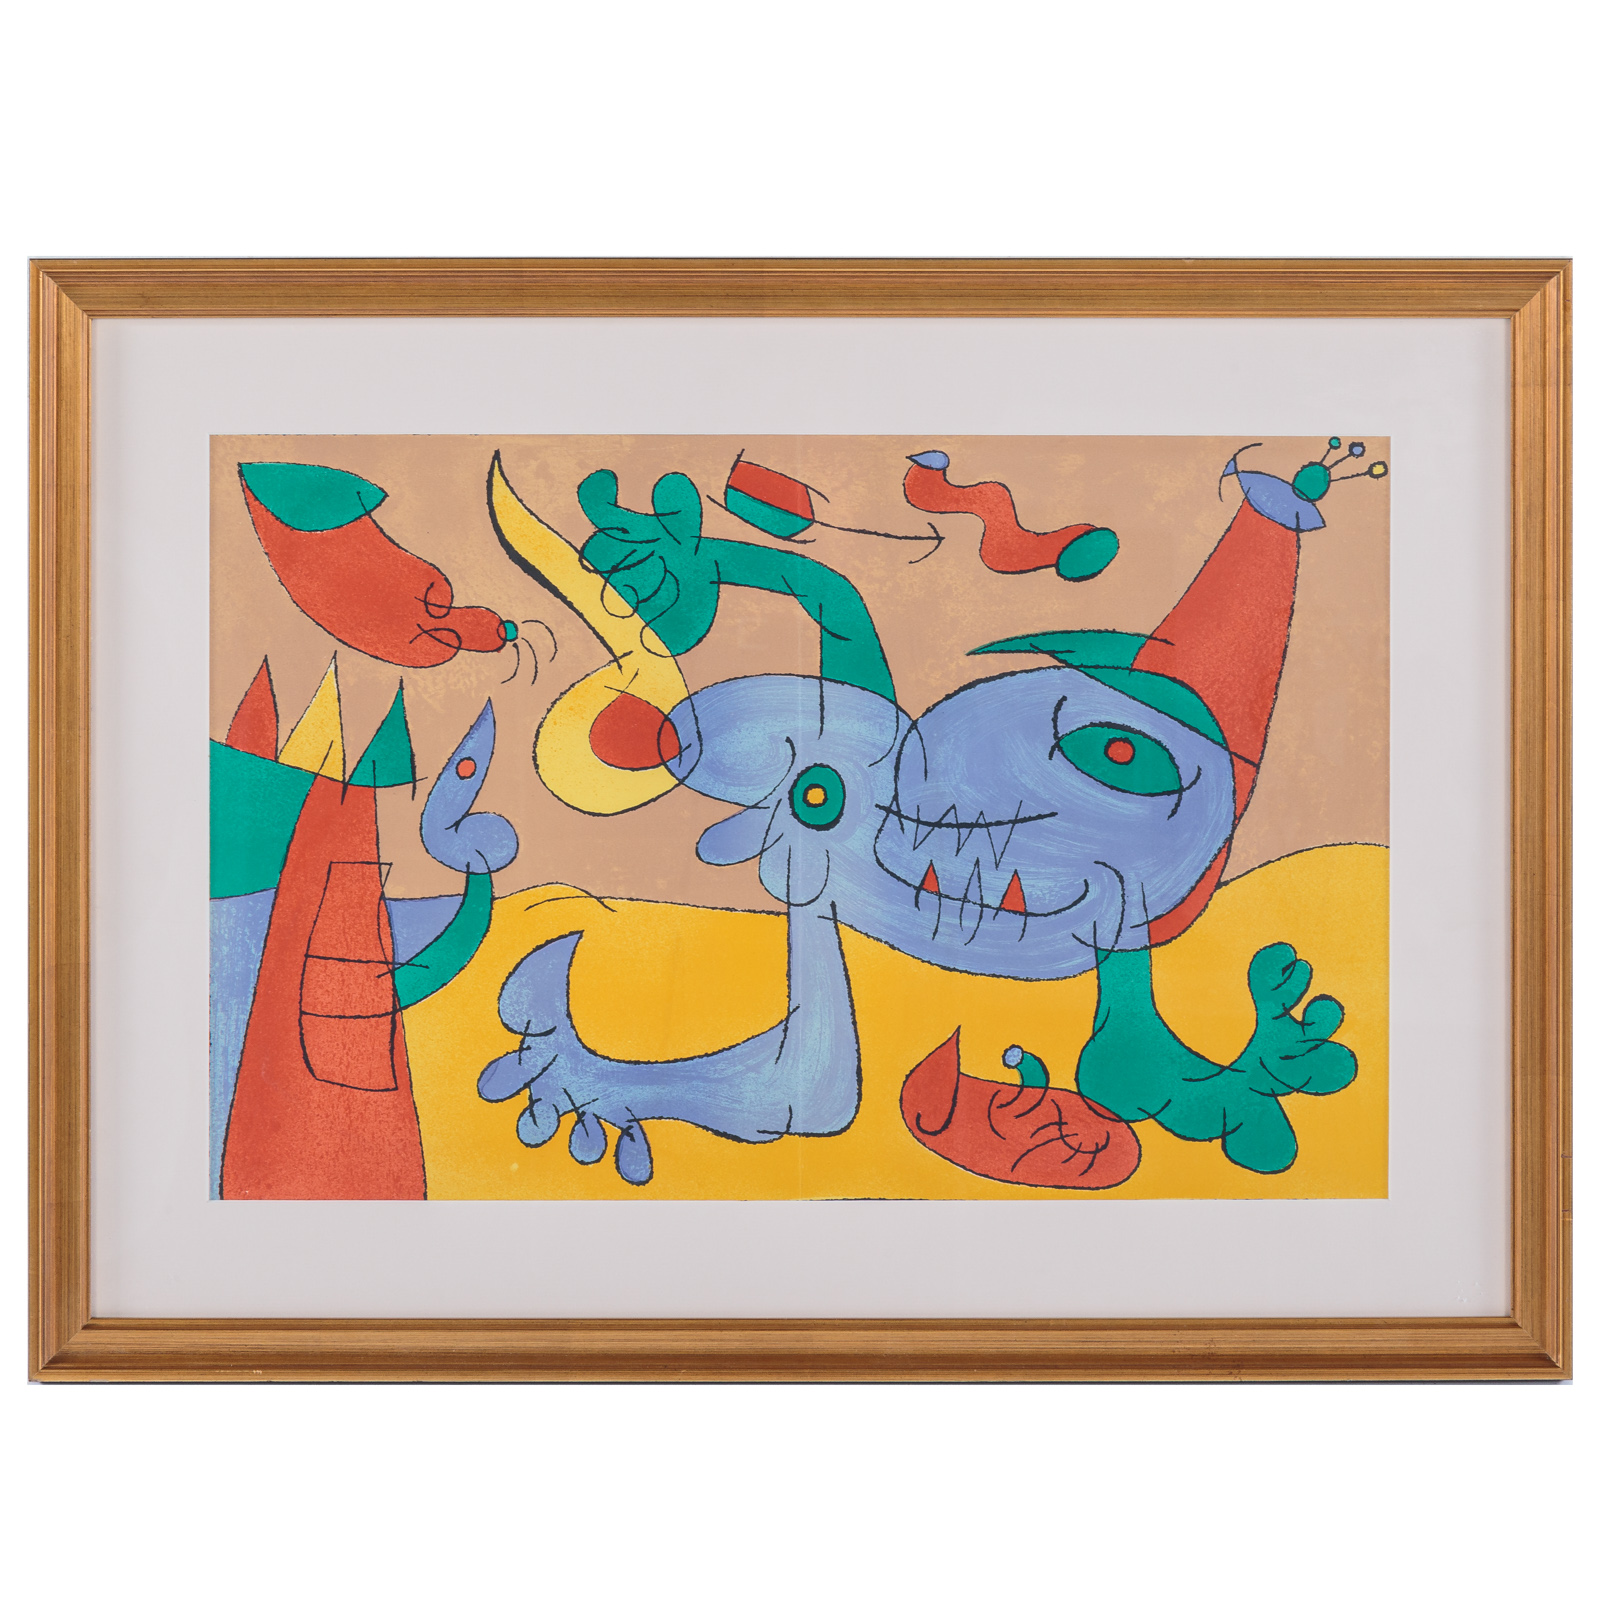 JOAN MIRO. UNTITLED, FROM THE "UBI